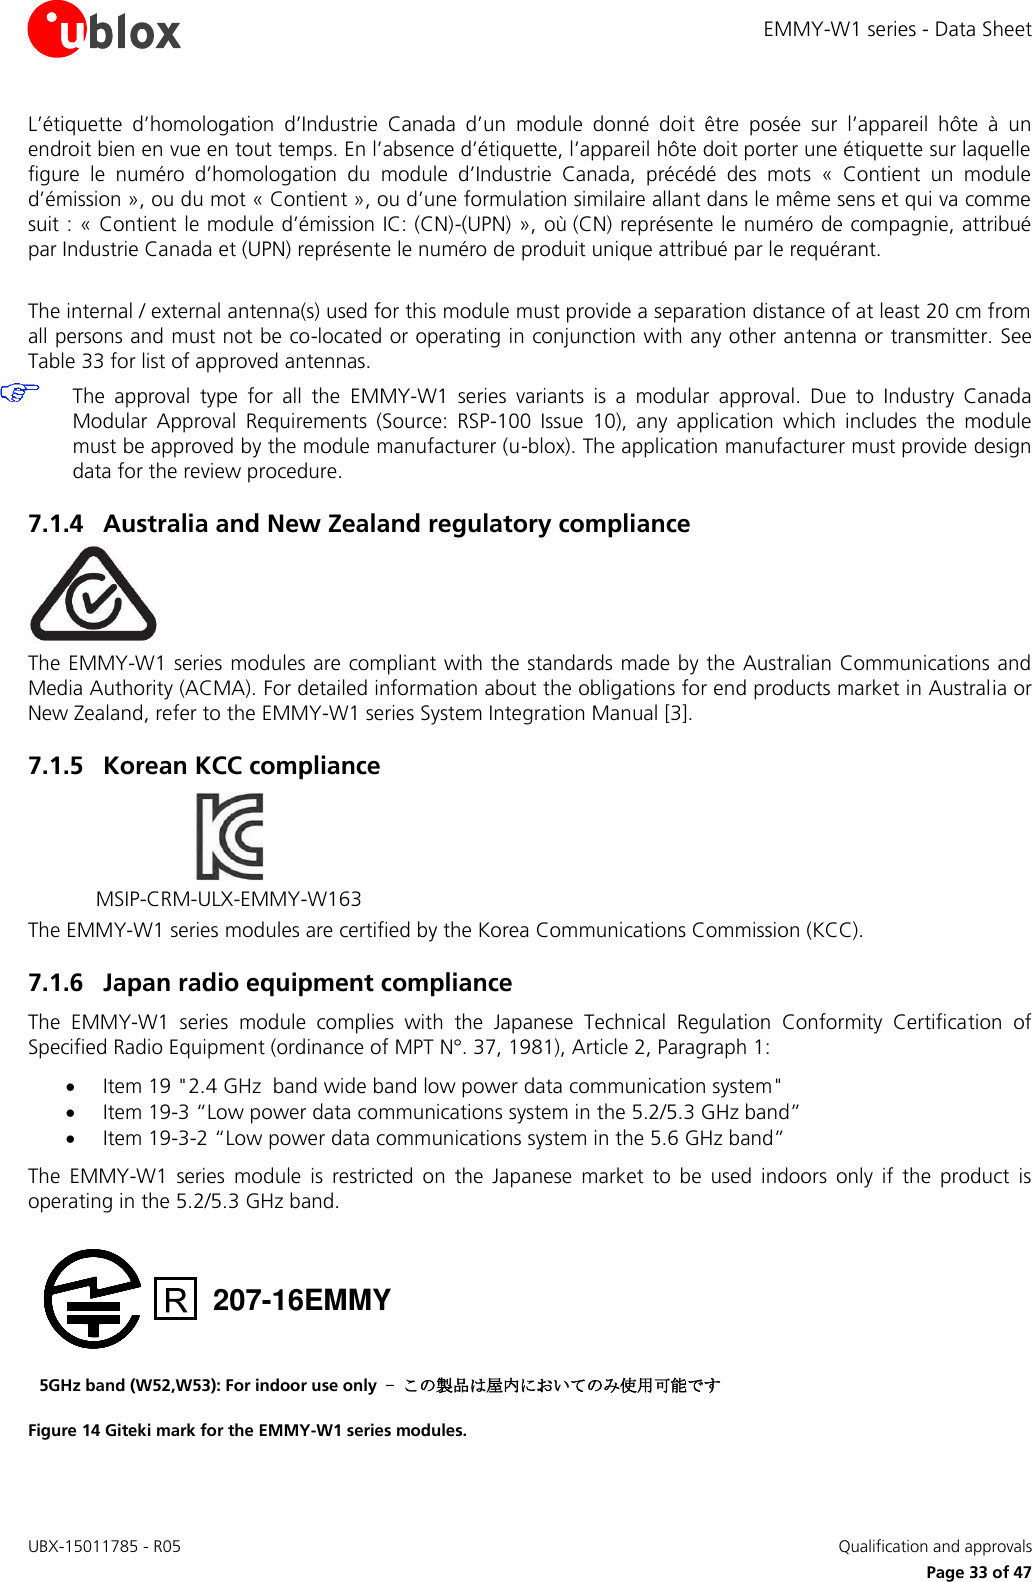 EMMY-W1 series - Data Sheet UBX-15011785 - R05   Qualification and approvals     Page 33 of 47 L’étiquette  d’homologation  d’Industrie  Canada  d’un  module  donné  doit  être  posée  sur  l’appareil  hôte  à  un endroit bien en vue en tout temps. En l’absence d’étiquette, l’appareil hôte doit porter une étiquette sur laquelle figure  le  numéro  d’homologation  du  module  d’Industrie  Canada,  précédé  des  mots  «  Contient  un  module d’émission », ou du mot « Contient », ou d’une formulation similaire allant dans le même sens et qui va comme suit : « Contient le module d’émission IC: (CN)-(UPN) », où (CN) représente le numéro de compagnie, attribué par Industrie Canada et (UPN) représente le numéro de produit unique attribué par le requérant.  The internal / external antenna(s) used for this module must provide a separation distance of at least 20 cm from all persons and must not be co-located or operating in conjunction with any other antenna or transmitter. See Table 33 for list of approved antennas.  The  approval  type  for  all  the  EMMY-W1  series  variants  is  a  modular  approval.  Due  to  Industry  Canada Modular  Approval  Requirements  (Source:  RSP-100  Issue  10),  any  application  which  includes  the  module must be approved by the module manufacturer (u-blox). The application manufacturer must provide design data for the review procedure.  7.1.4 Australia and New Zealand regulatory compliance  The EMMY-W1 series modules are compliant with the standards made by the Australian Communications and Media Authority (ACMA). For detailed information about the obligations for end products market in Australia or New Zealand, refer to the EMMY-W1 series System Integration Manual [3]. 7.1.5 Korean KCC compliance  MSIP-CRM-ULX-EMMY-W163  The EMMY-W1 series modules are certified by the Korea Communications Commission (KCC). 7.1.6 Japan radio equipment compliance The  EMMY-W1  series  module  complies  with  the  Japanese  Technical  Regulation  Conformity  Certification  of Specified Radio Equipment (ordinance of MPT N°. 37, 1981), Article 2, Paragraph 1:   Item 19 &quot;2.4 GHz  band wide band low power data communication system&quot;  Item 19-3 “Low power data communications system in the 5.2/5.3 GHz band”  Item 19-3-2 “Low power data communications system in the 5.6 GHz band”  The  EMMY-W1  series  module  is  restricted  on  the  Japanese  market  to  be  used  indoors  only  if  the  product  is operating in the 5.2/5.3 GHz band.   207-16EMMY 5GHz band (W52,W53): For indoor use only - この製品は屋内においてのみ使用可能です Figure 14 Giteki mark for the EMMY-W1 series modules. 